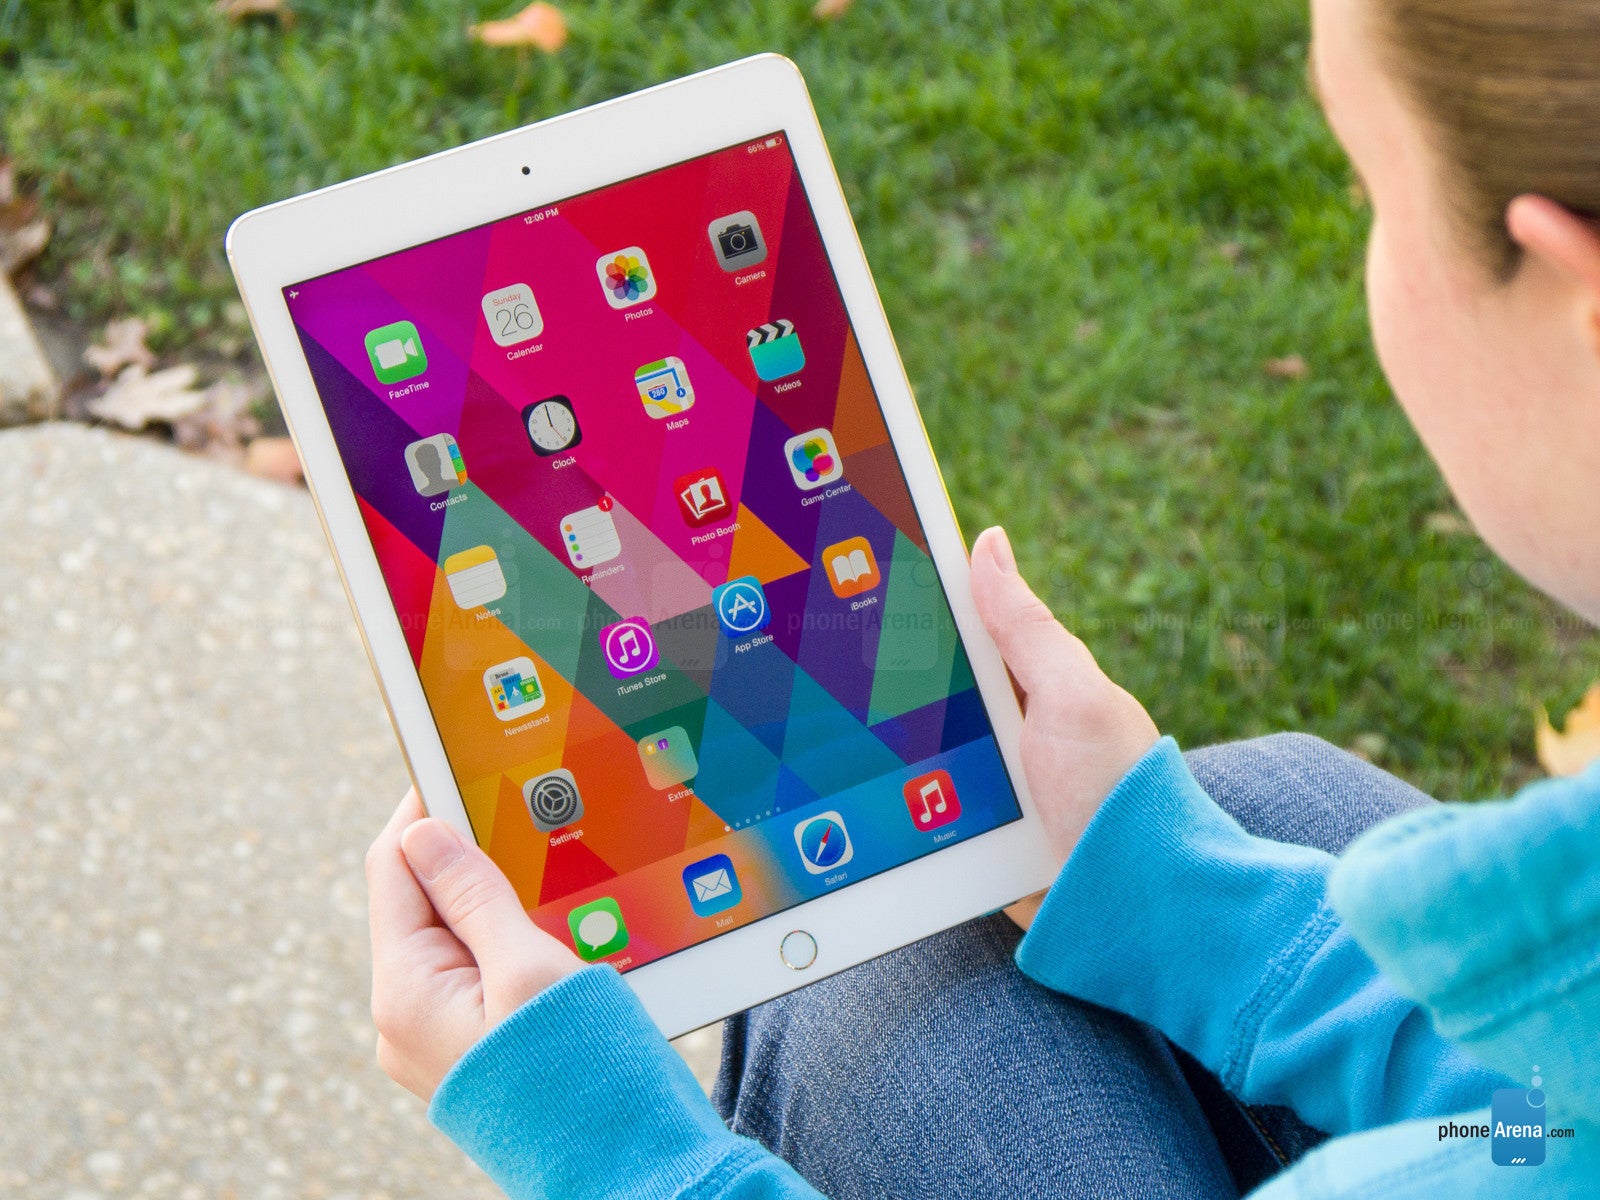 Apple rumored to bestow the iPad Air 3 with a 4K-resolution screen